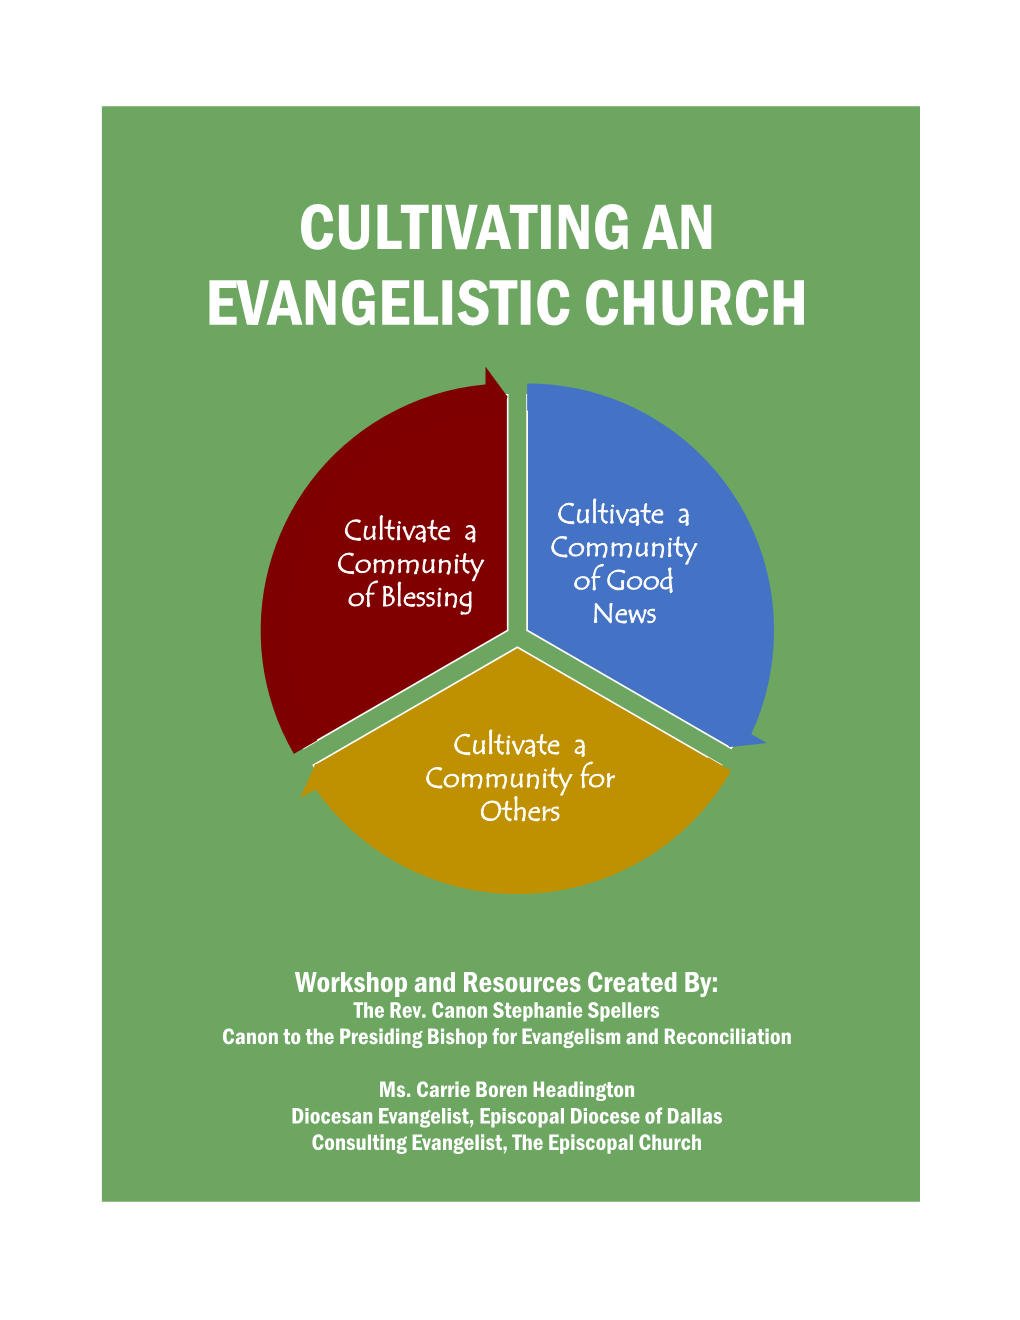 Cultivating an Evangelistic Church